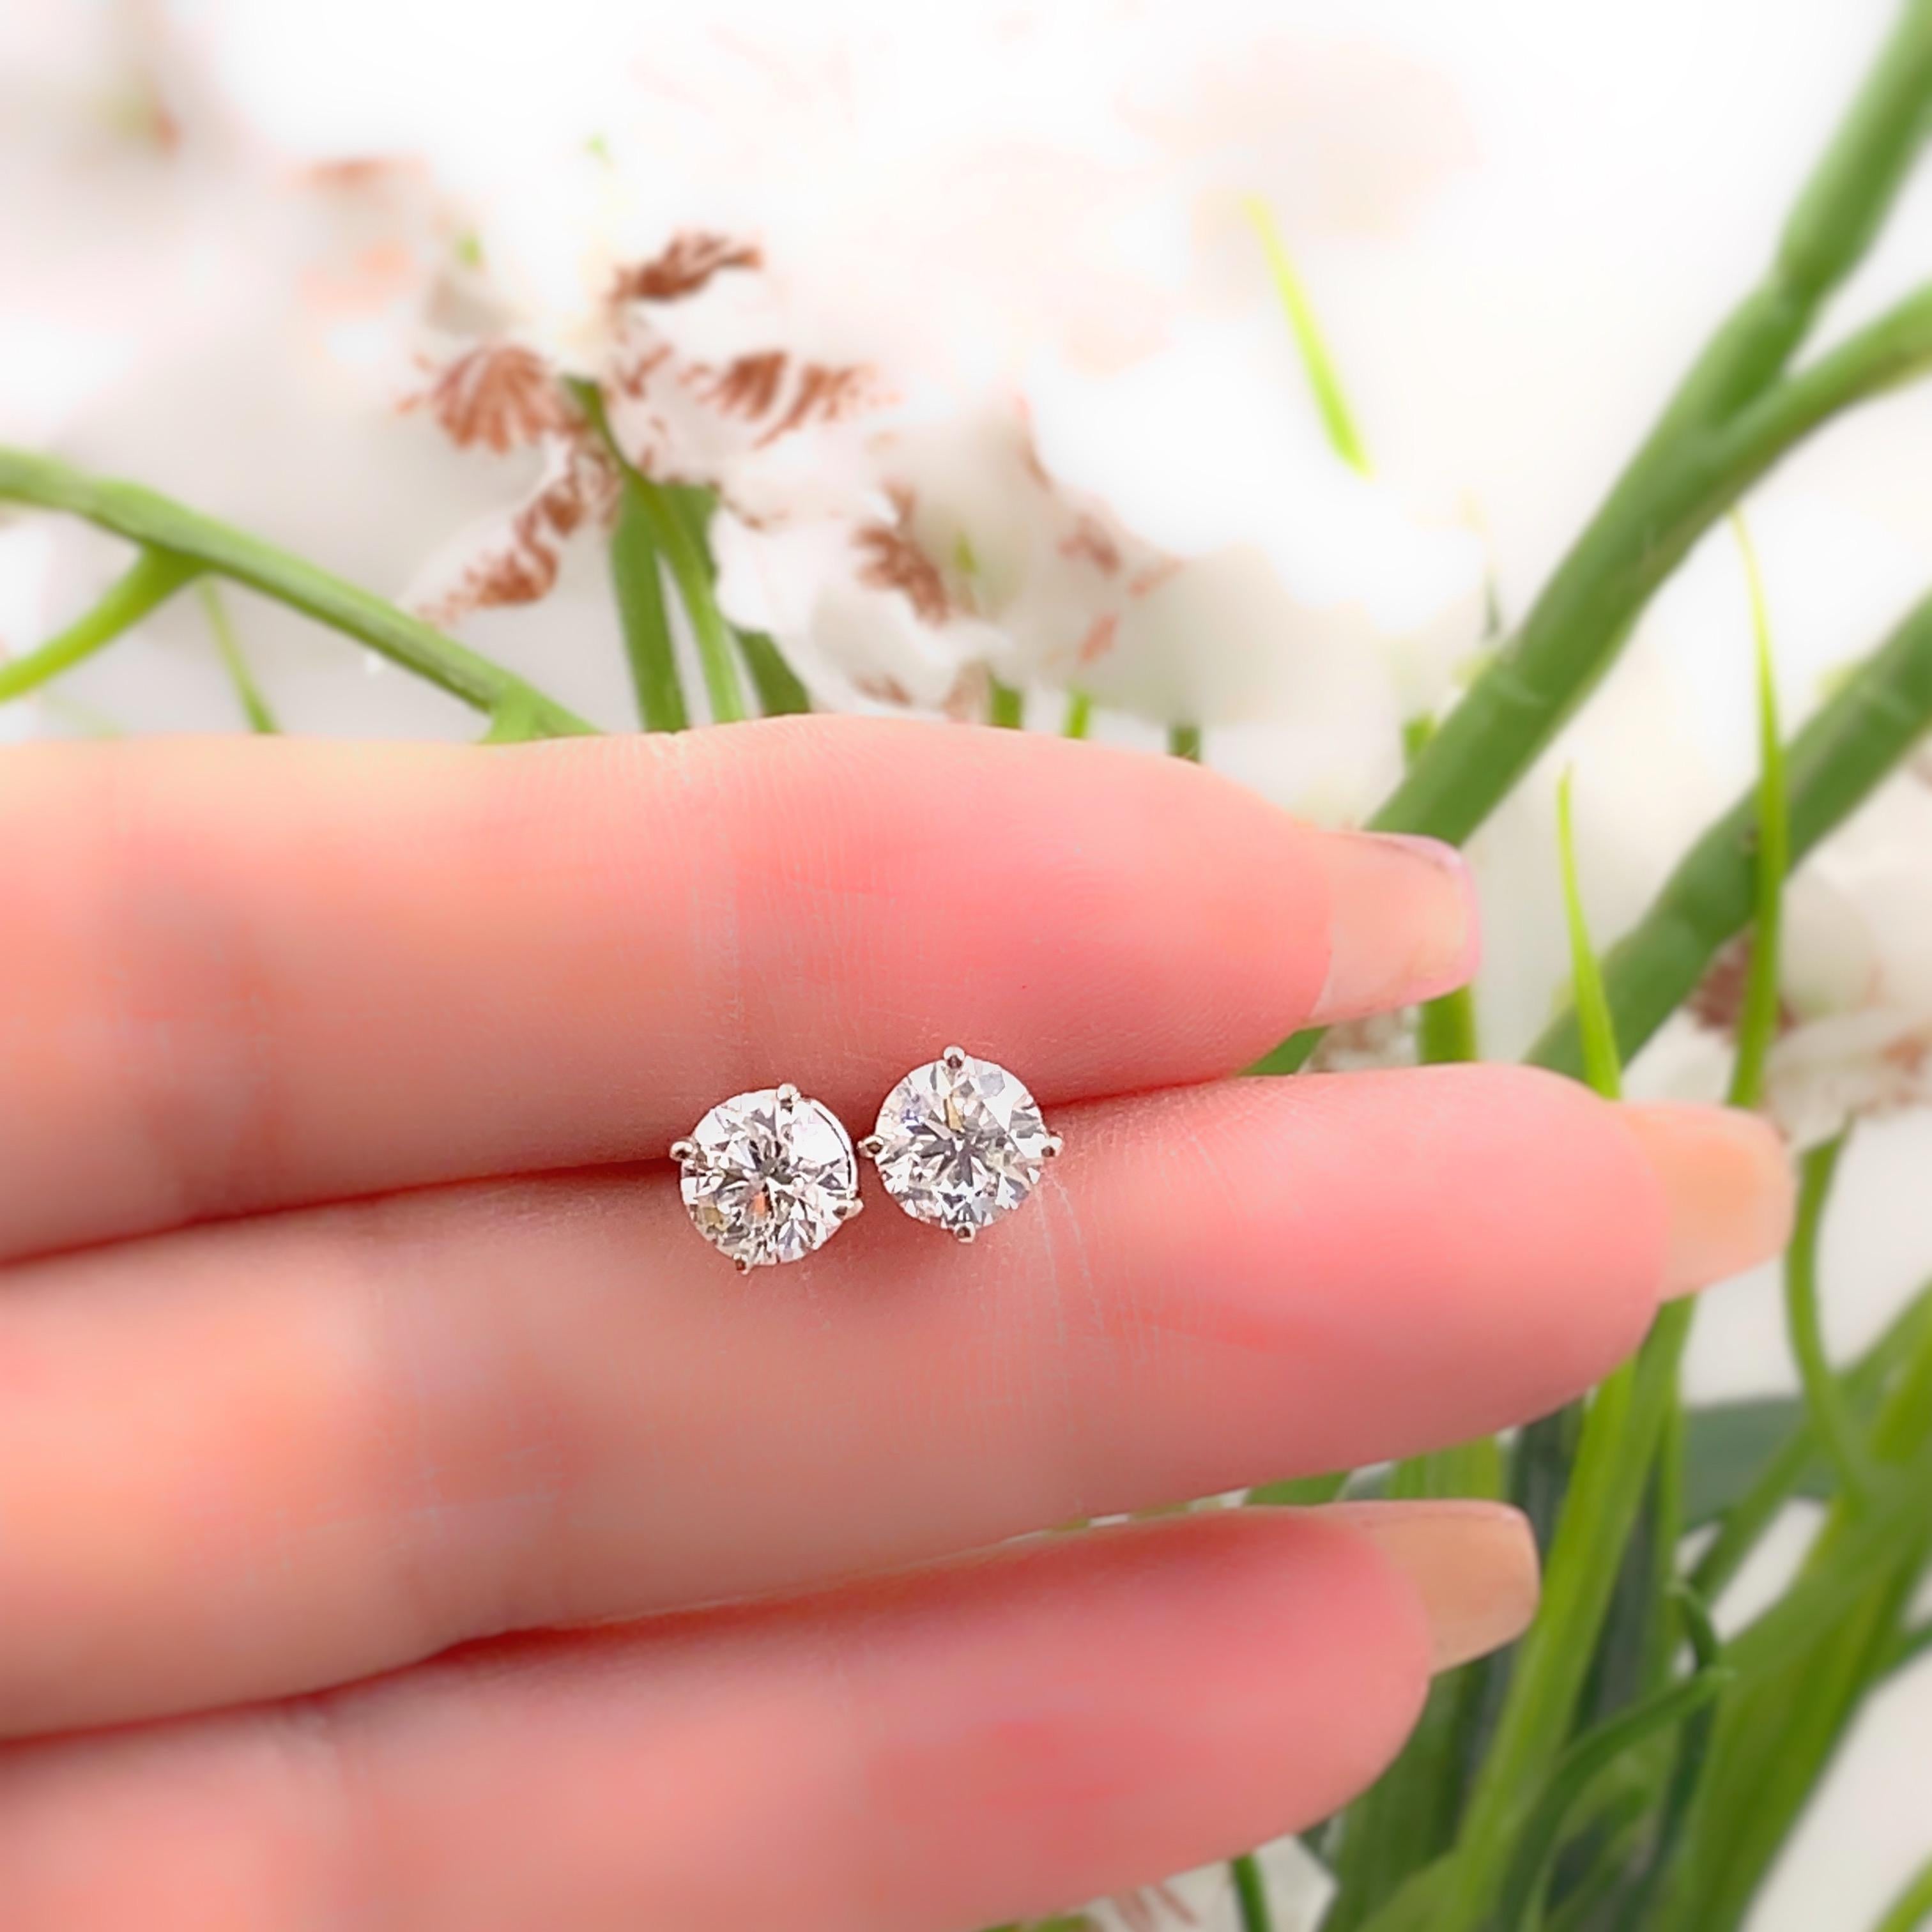 Round Brilliant Diamond Solitaire Stud Earrings
Style:  4 Prong Screw Back
Ref. number:  MP18925
Metal:  14kt White Gold
TCW:  1.85 tcw
Main Diamond:  2 Round Brilliant Diamonds
Color & Clarity:  H - I, I1 - I2 
Hallmark:  14KT
Includes:  Certified